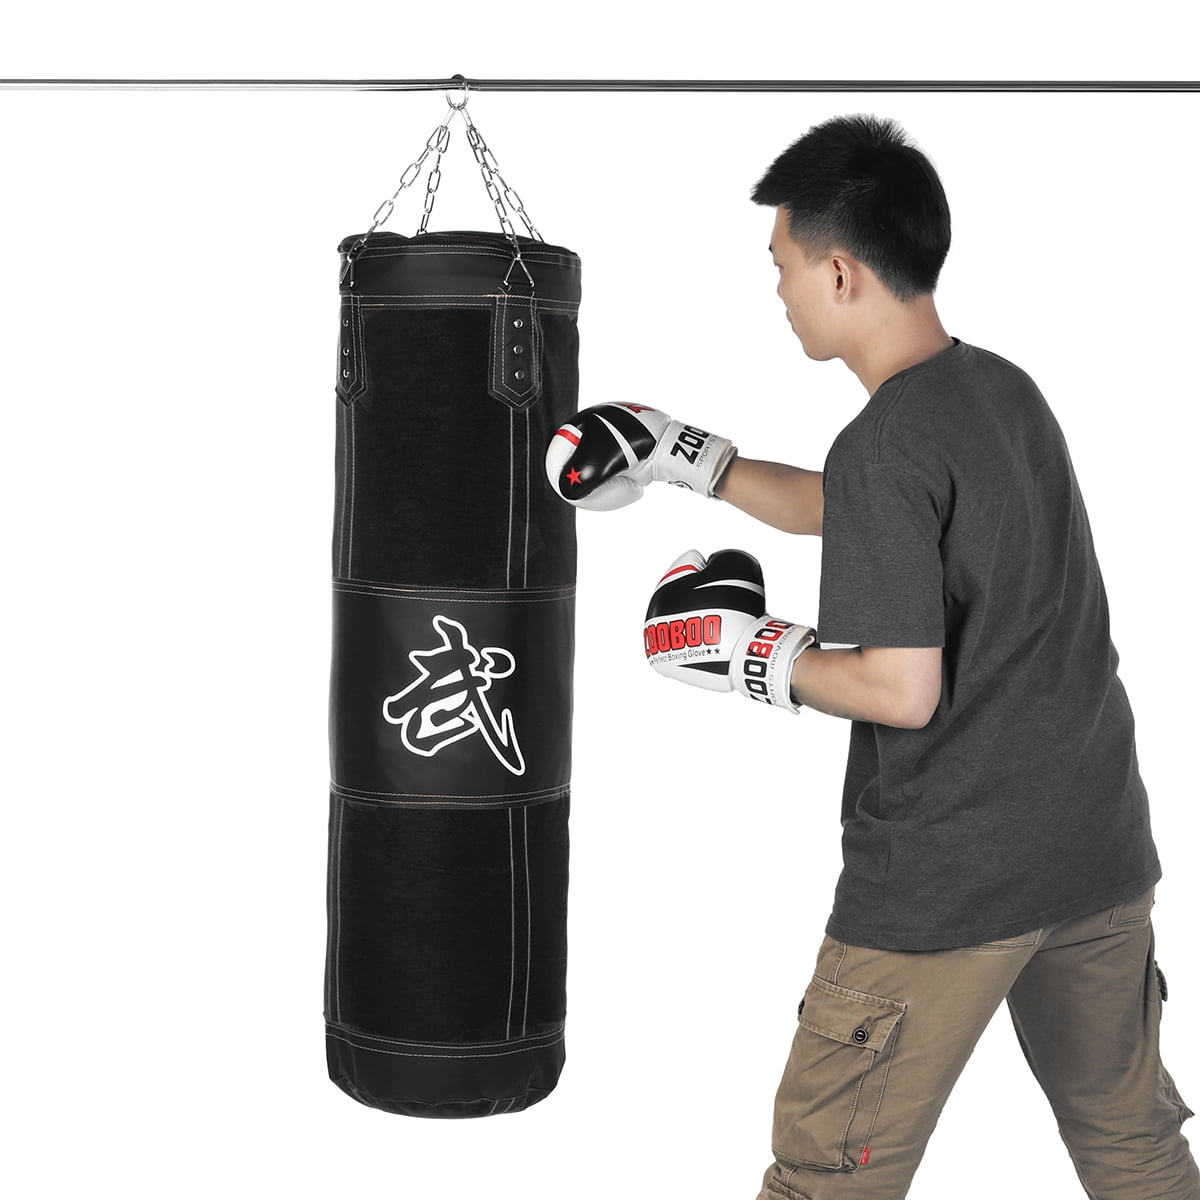 Punch Bag Boxing REAL BLACK LEATHER MMA Heavy Training Martial Arts 3FT Unfilled 